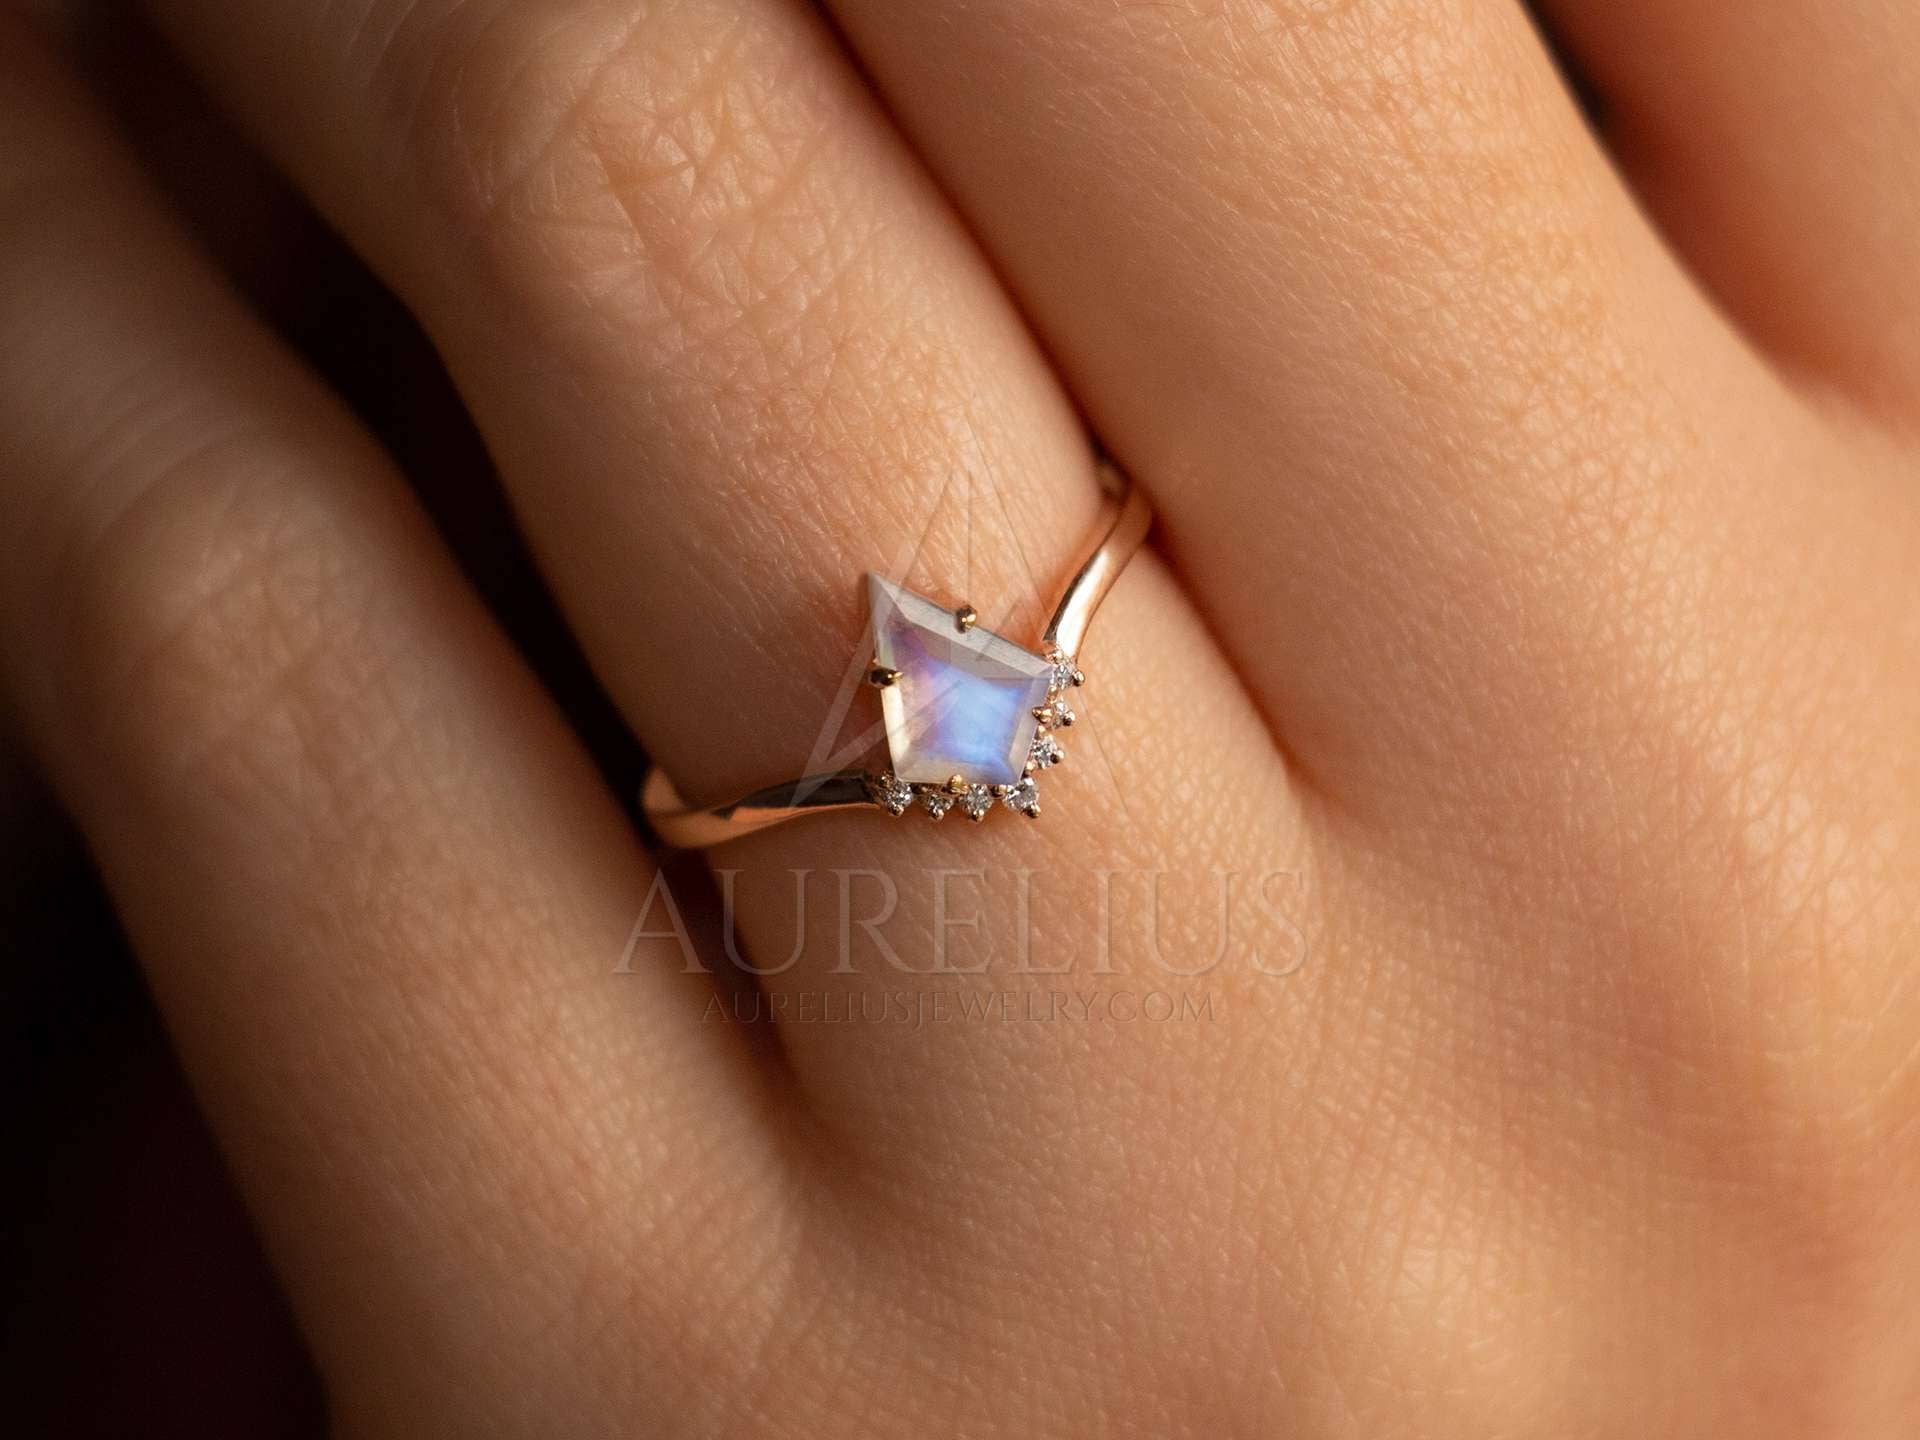 moonstone engagement ring on hand